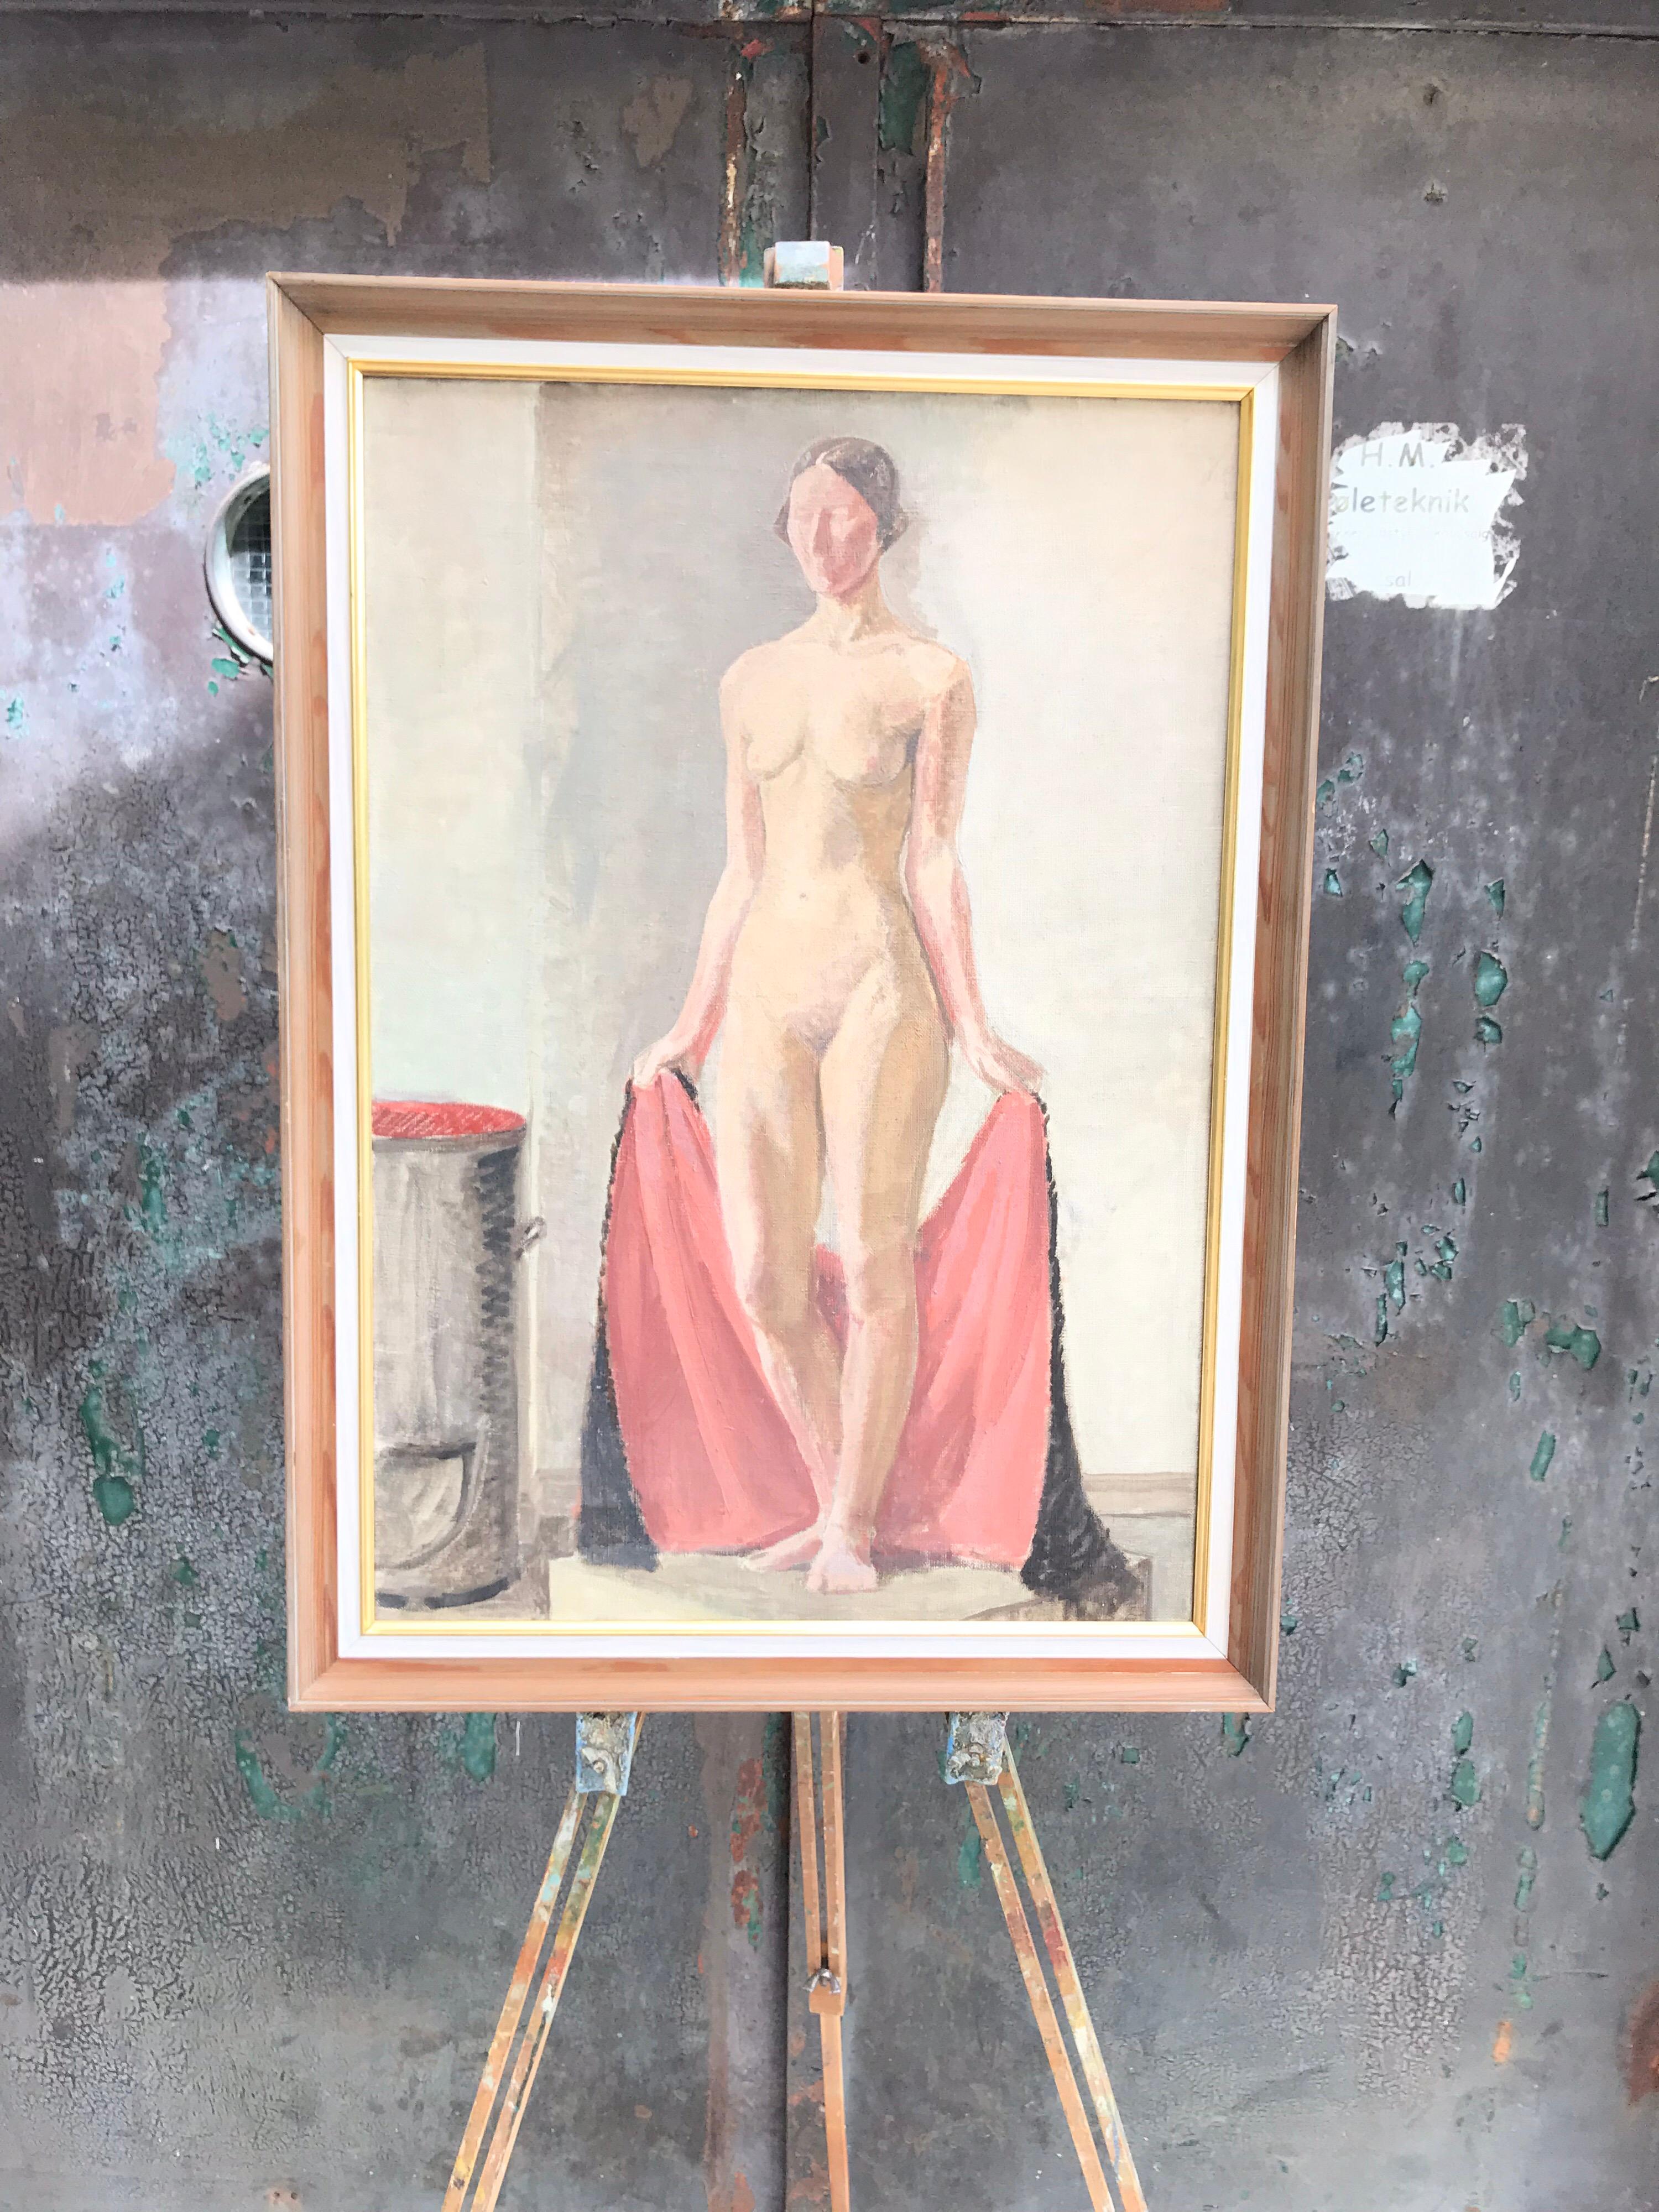 Beautiful art school oil on canvas painting of a naked lady 
From the 1950s 
Signed verso Knud Appel
Label reads “ painted by Knud Appel at the Art academy in Copenhagen “.